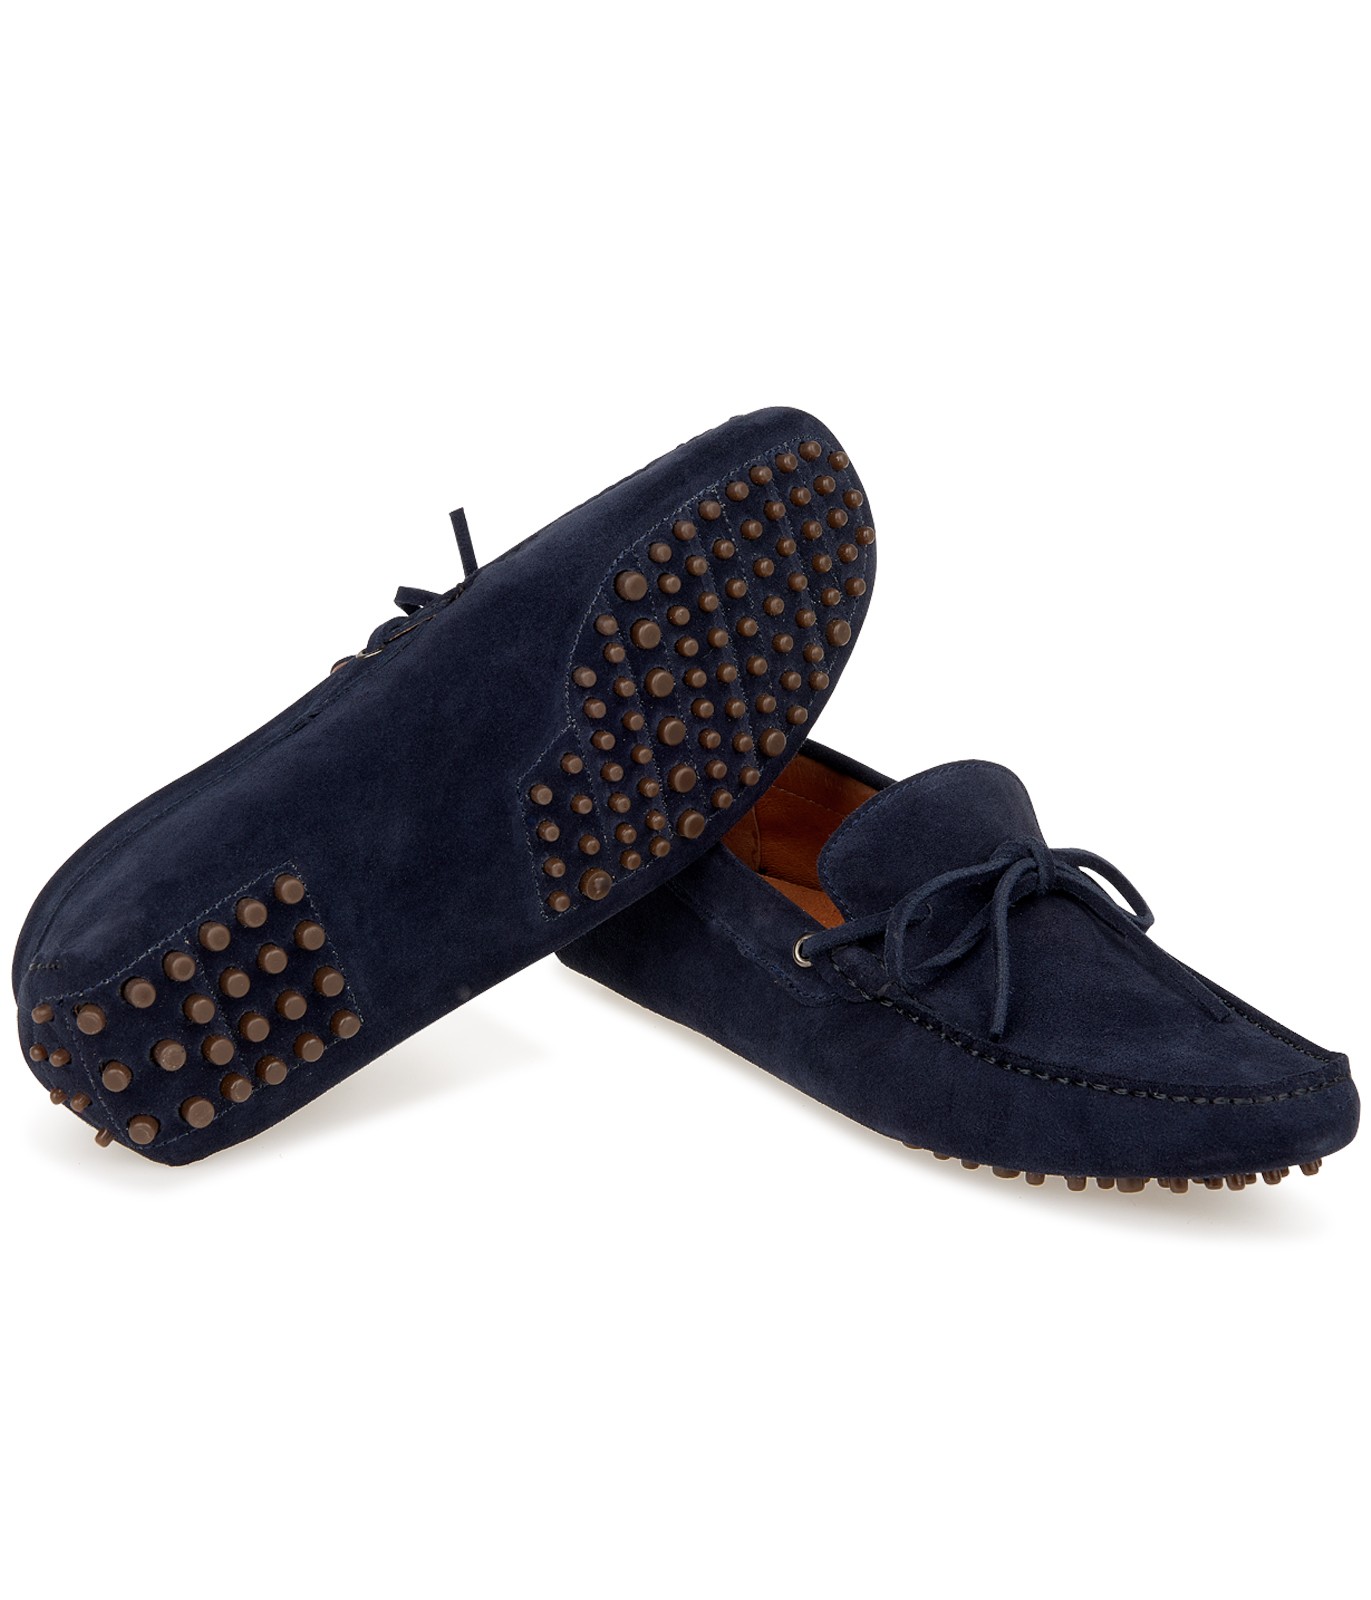 ros Give Mania MILANO - Navy blue suede calfskin loafers | Quality brand Europann